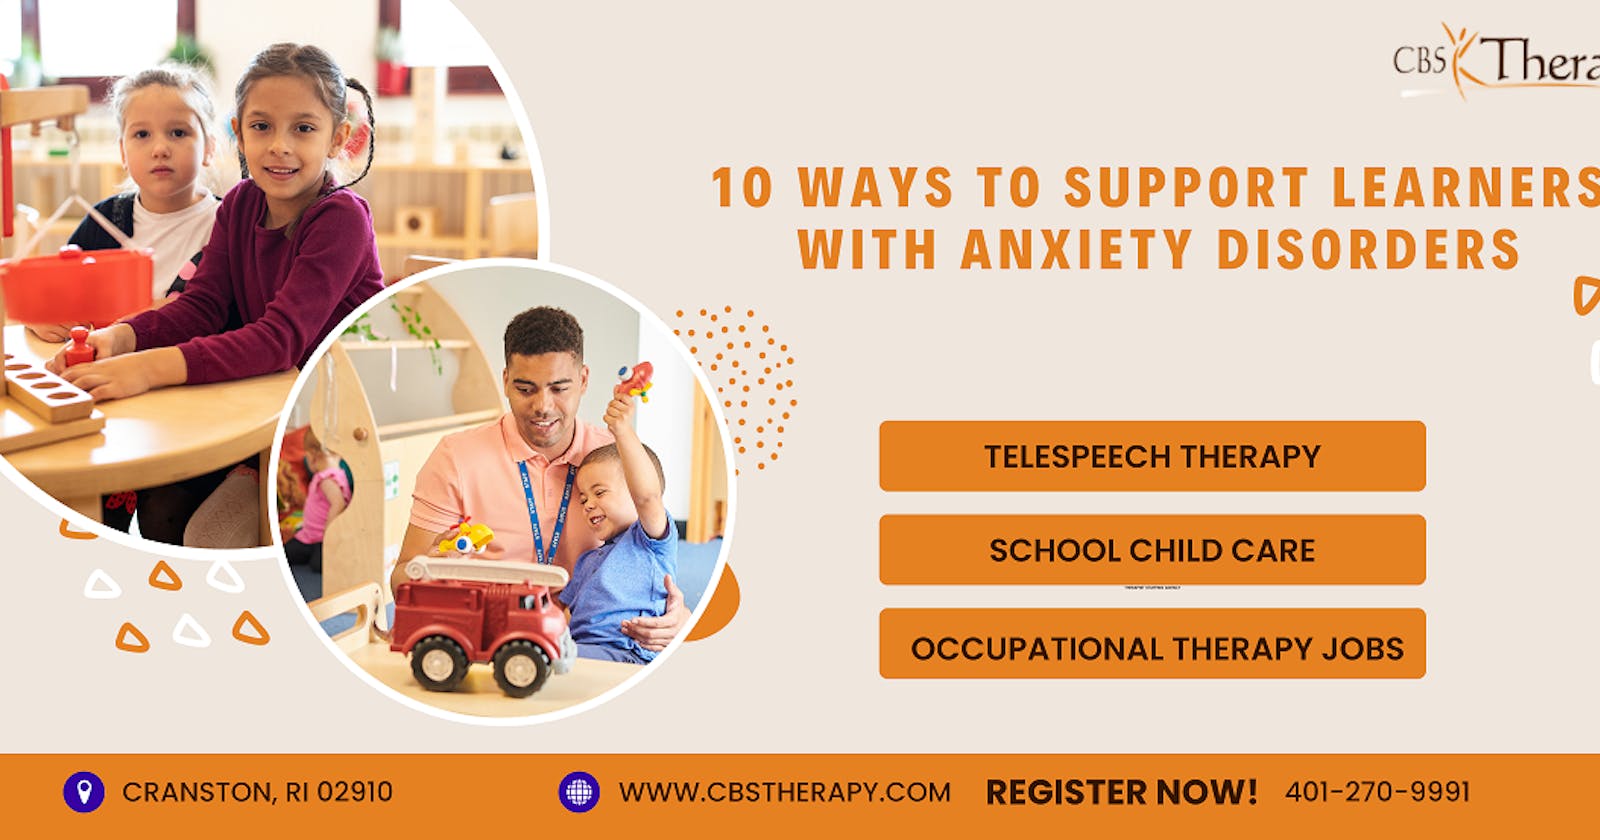 10 Strategies to Support Students with Anxiety Disorders in Learning Environments